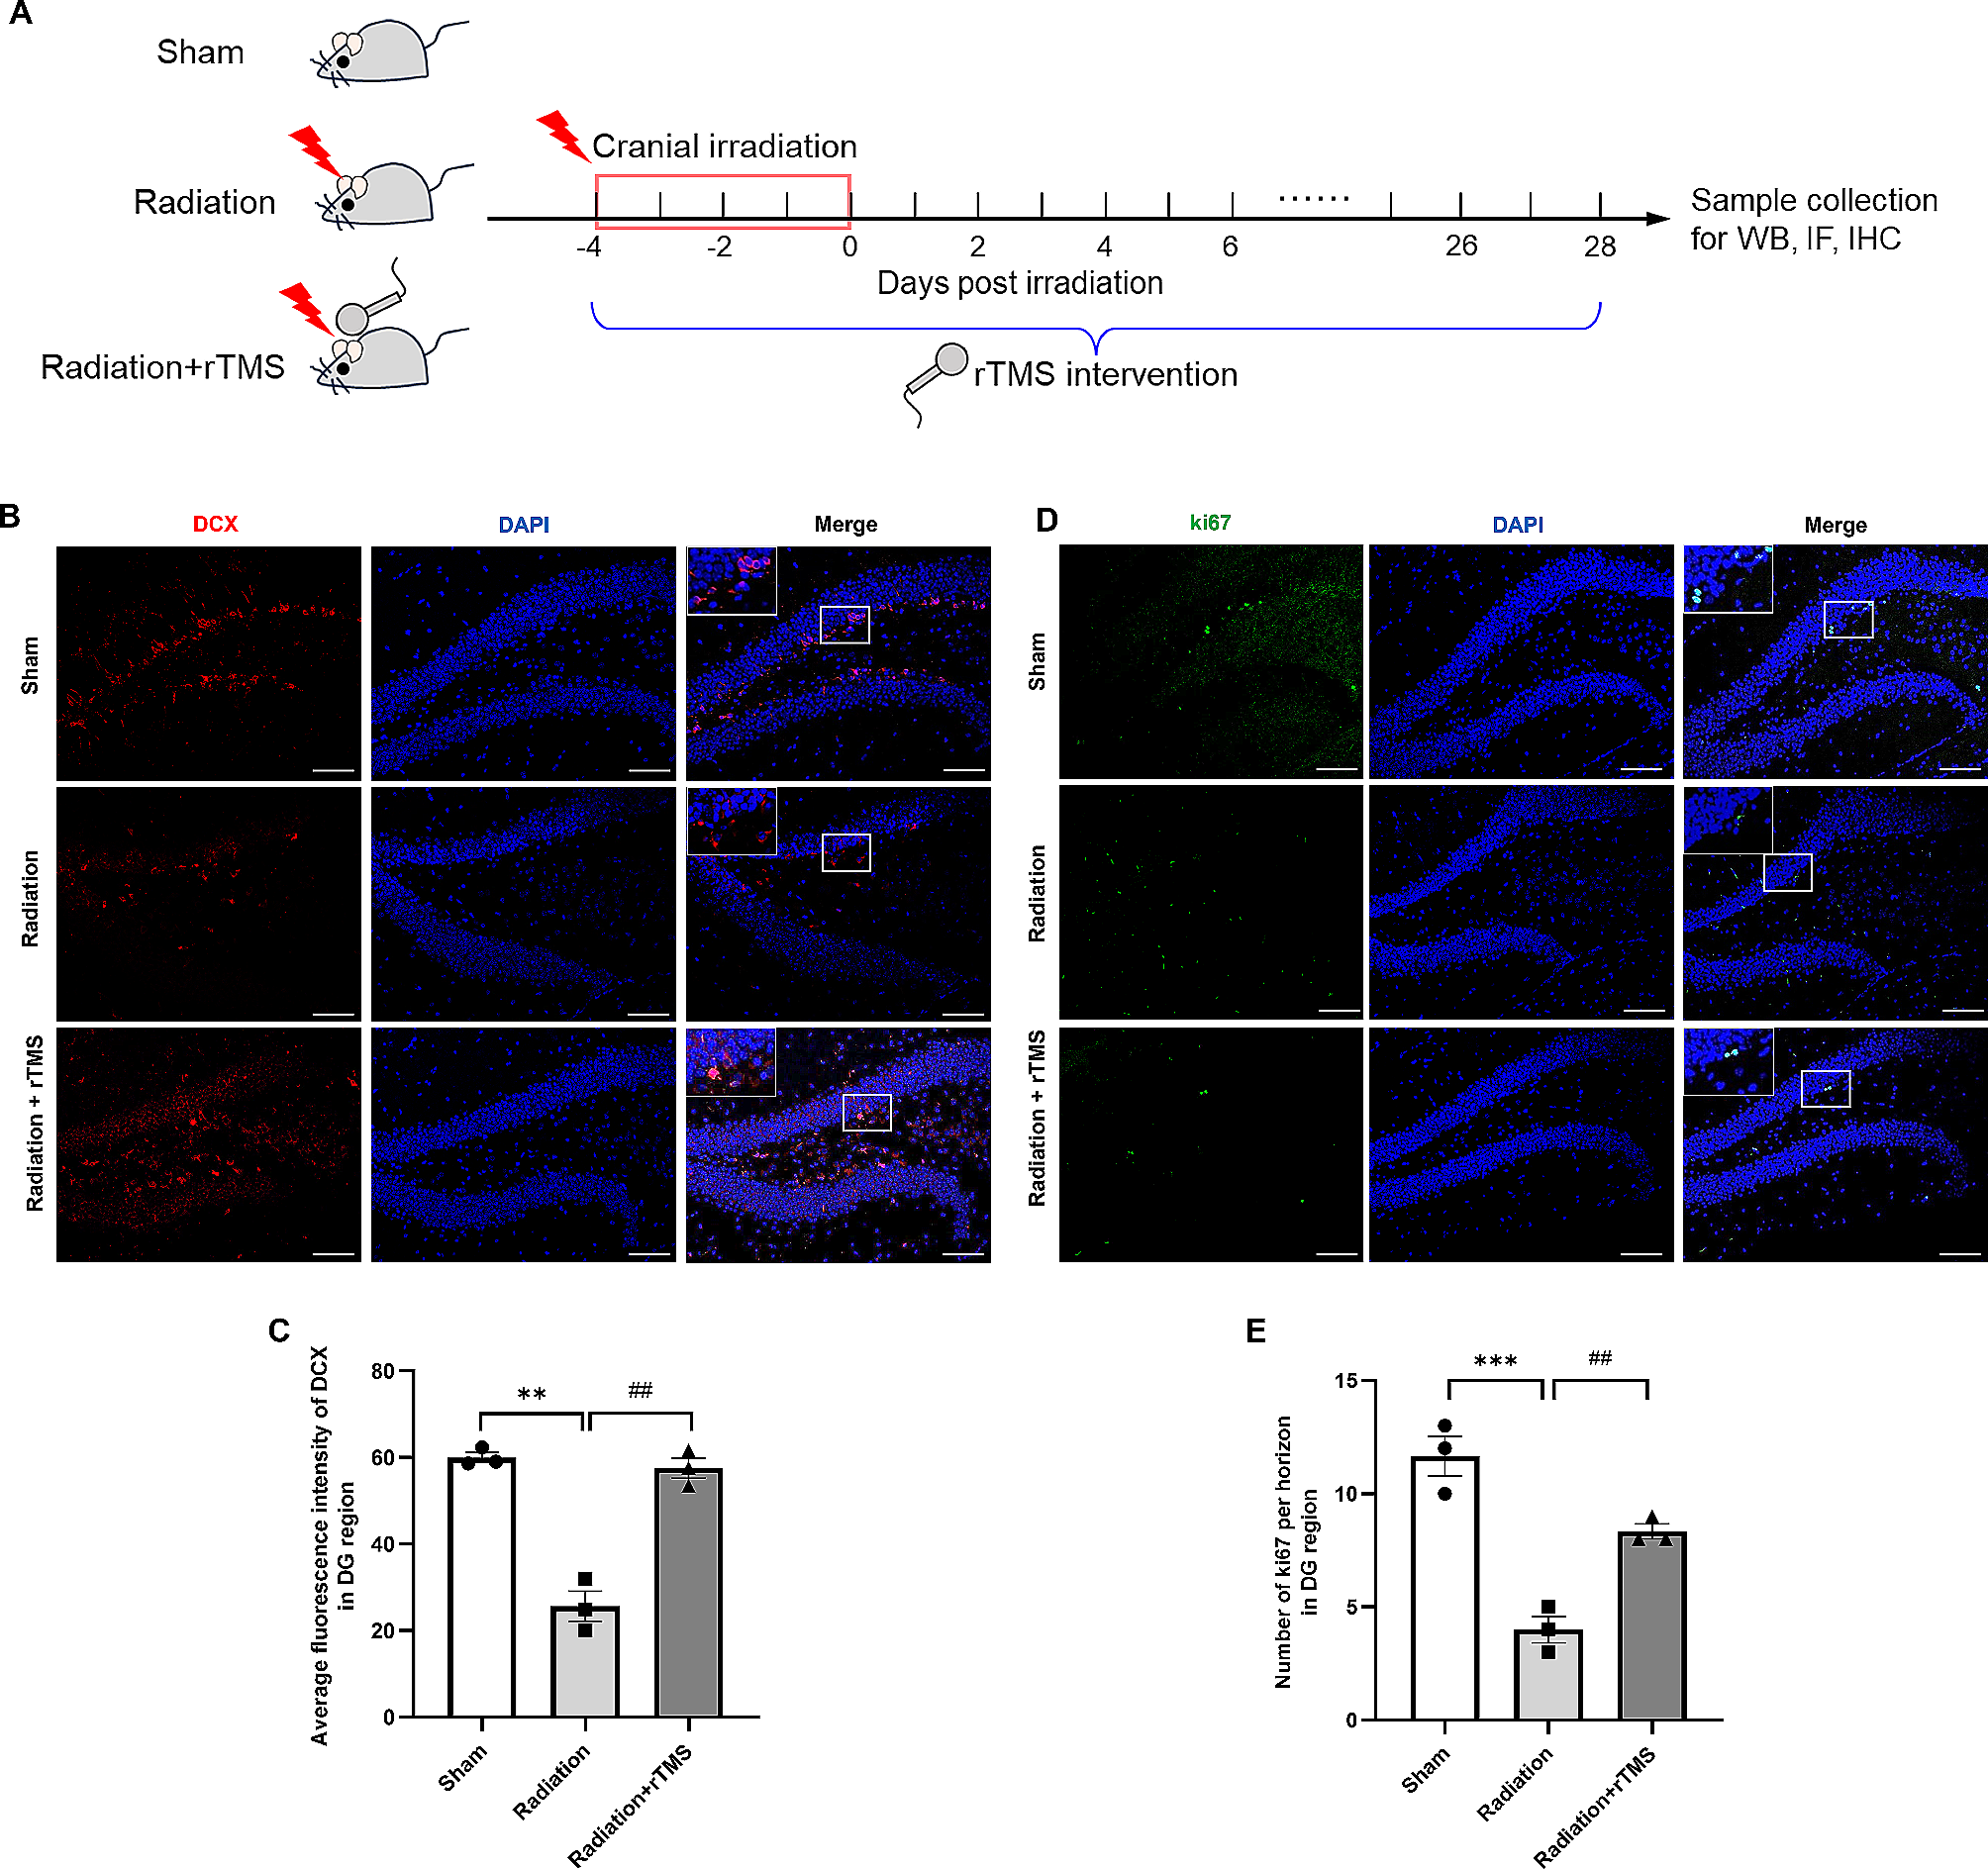 Repetitive transcranial magnetic stimulation ameliorates cognitive deficits in mice with radiation-induced brain injury by attenuating microglial pyroptosis and promoting neurogenesis via BDNF pathway